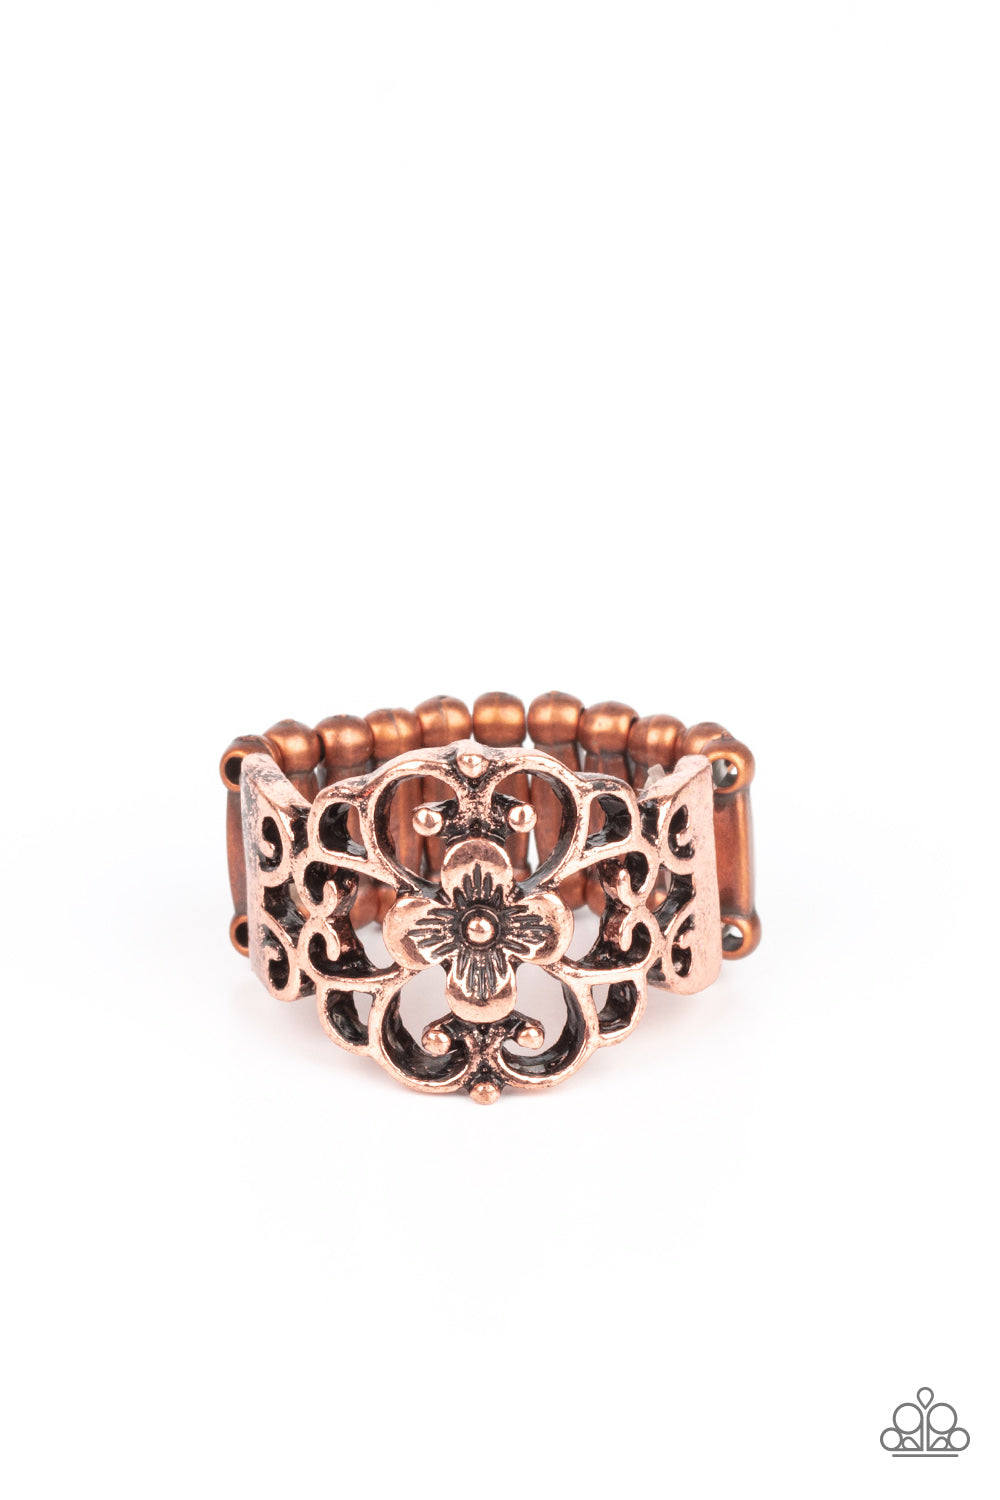 Paparazzi Ring - Fanciful Flower Gardens - Copper